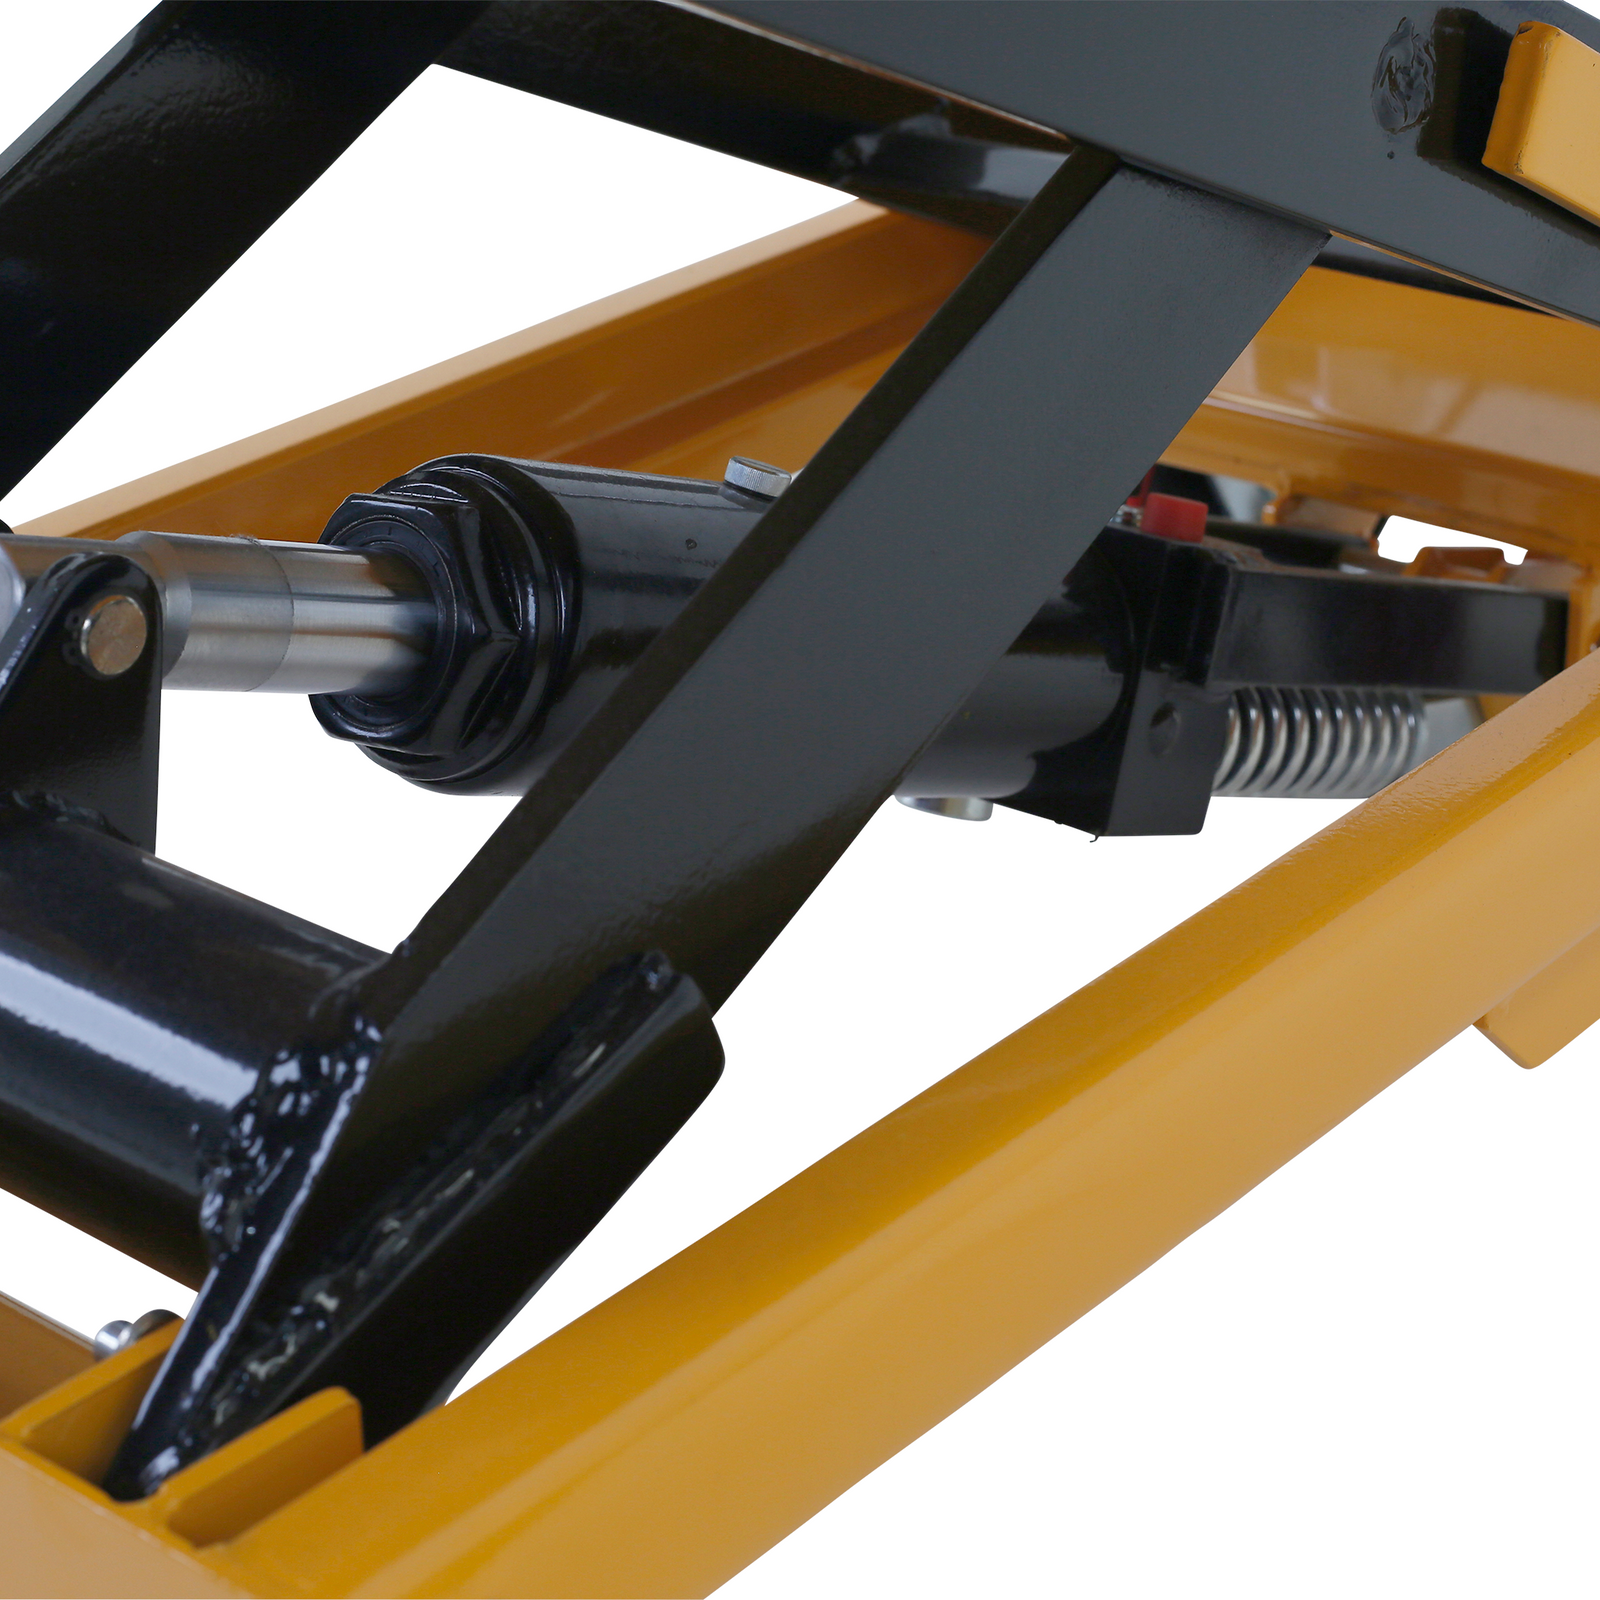 Hydraulic mechanism of the mobile scissor lift table for 660 pounds